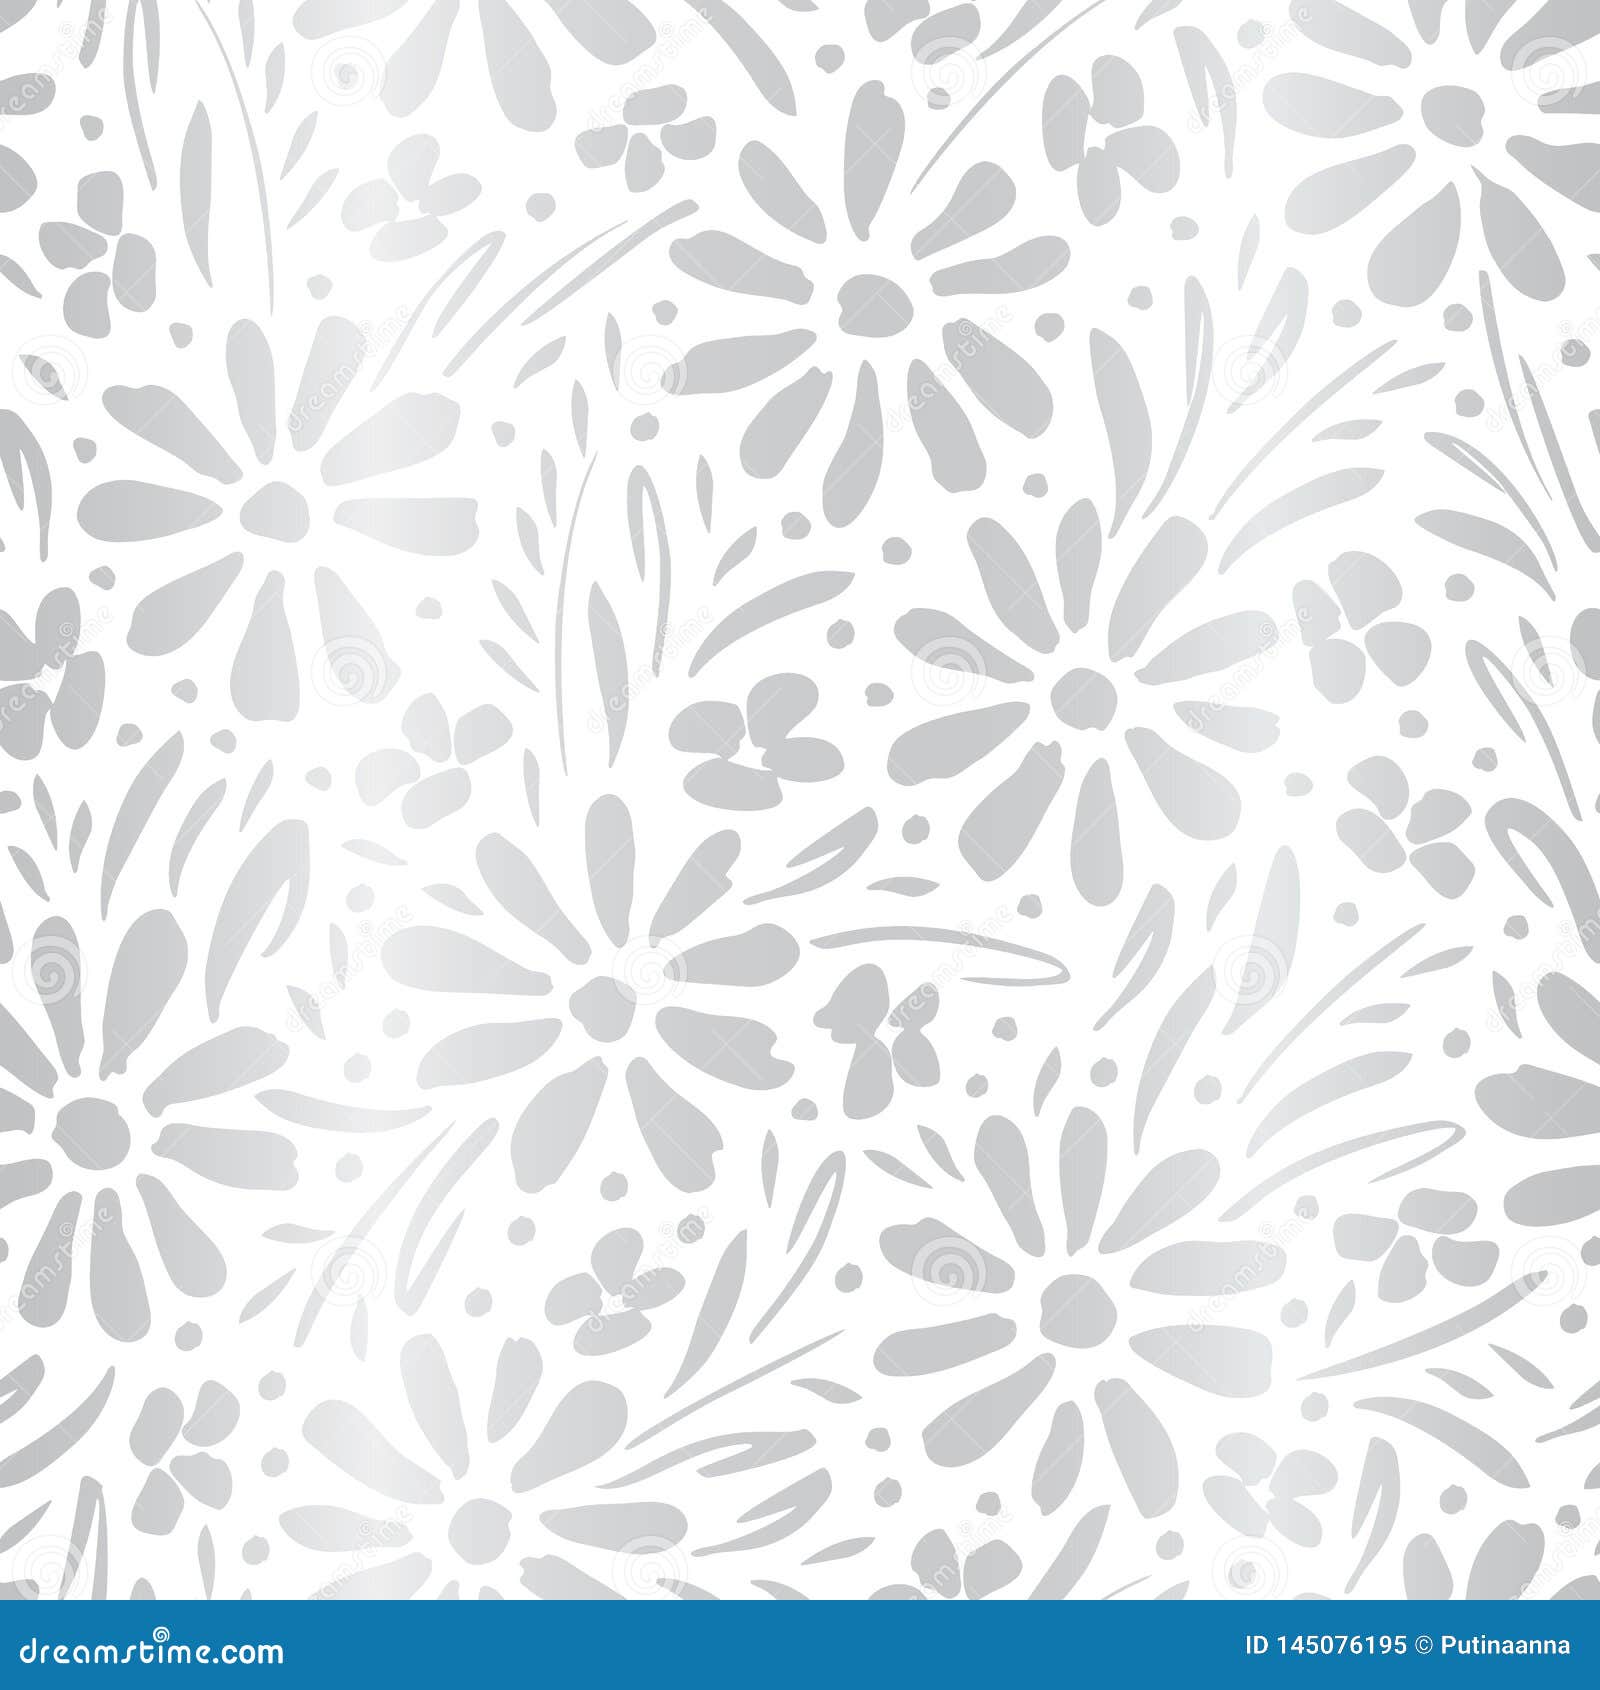 monochrome silver gradient hand-painted daisies and foliage on white background  seamless patters. floral print